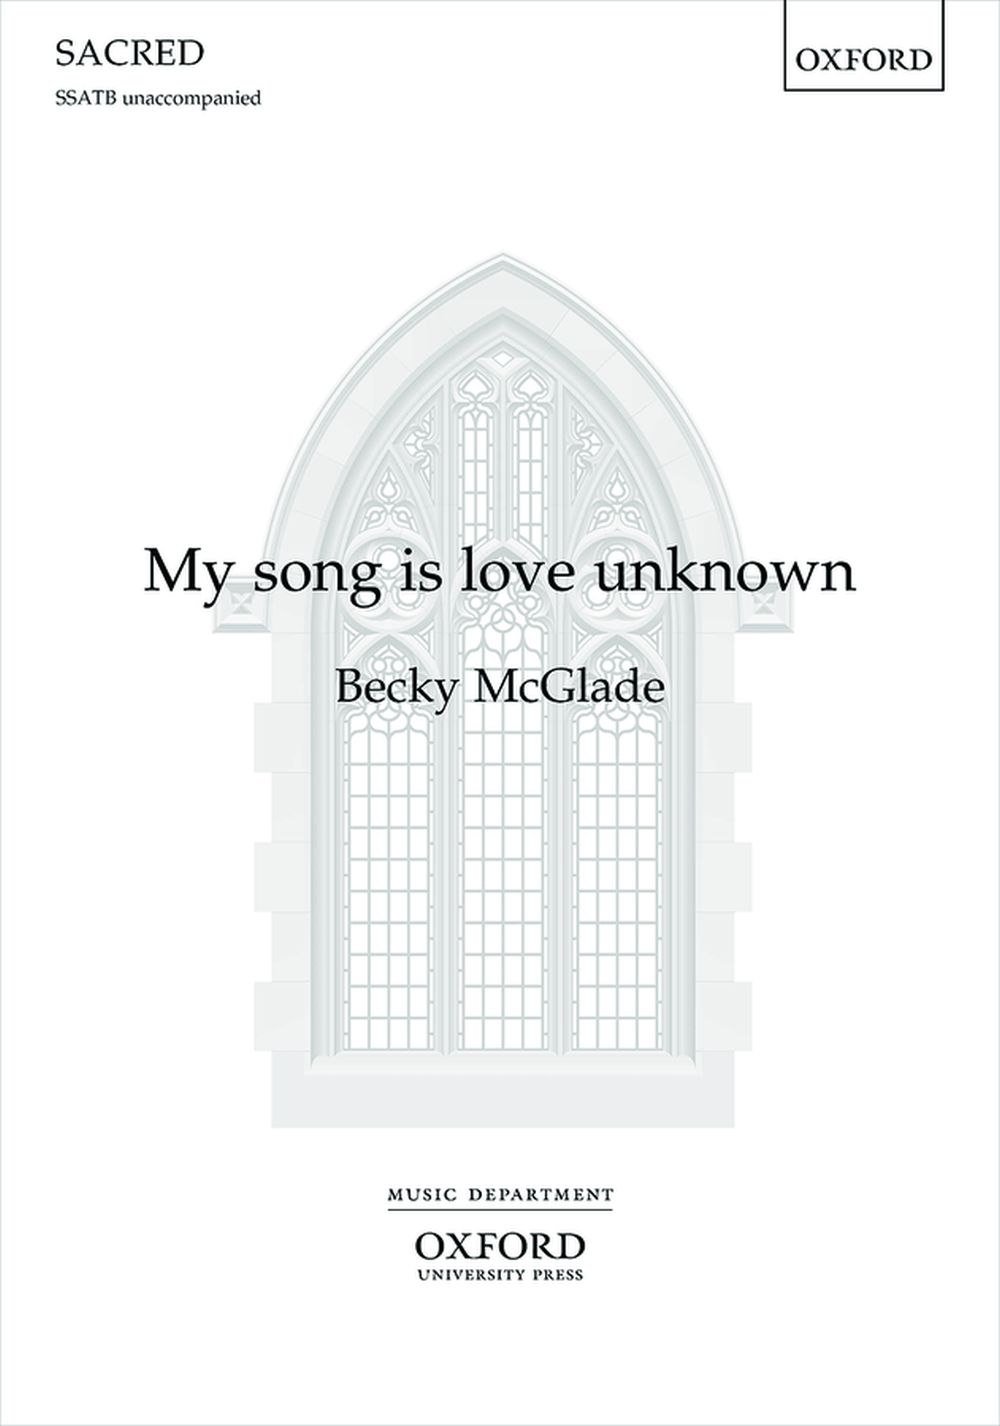 Becky McGlade: My song is love unknown: SATB: Vocal Score